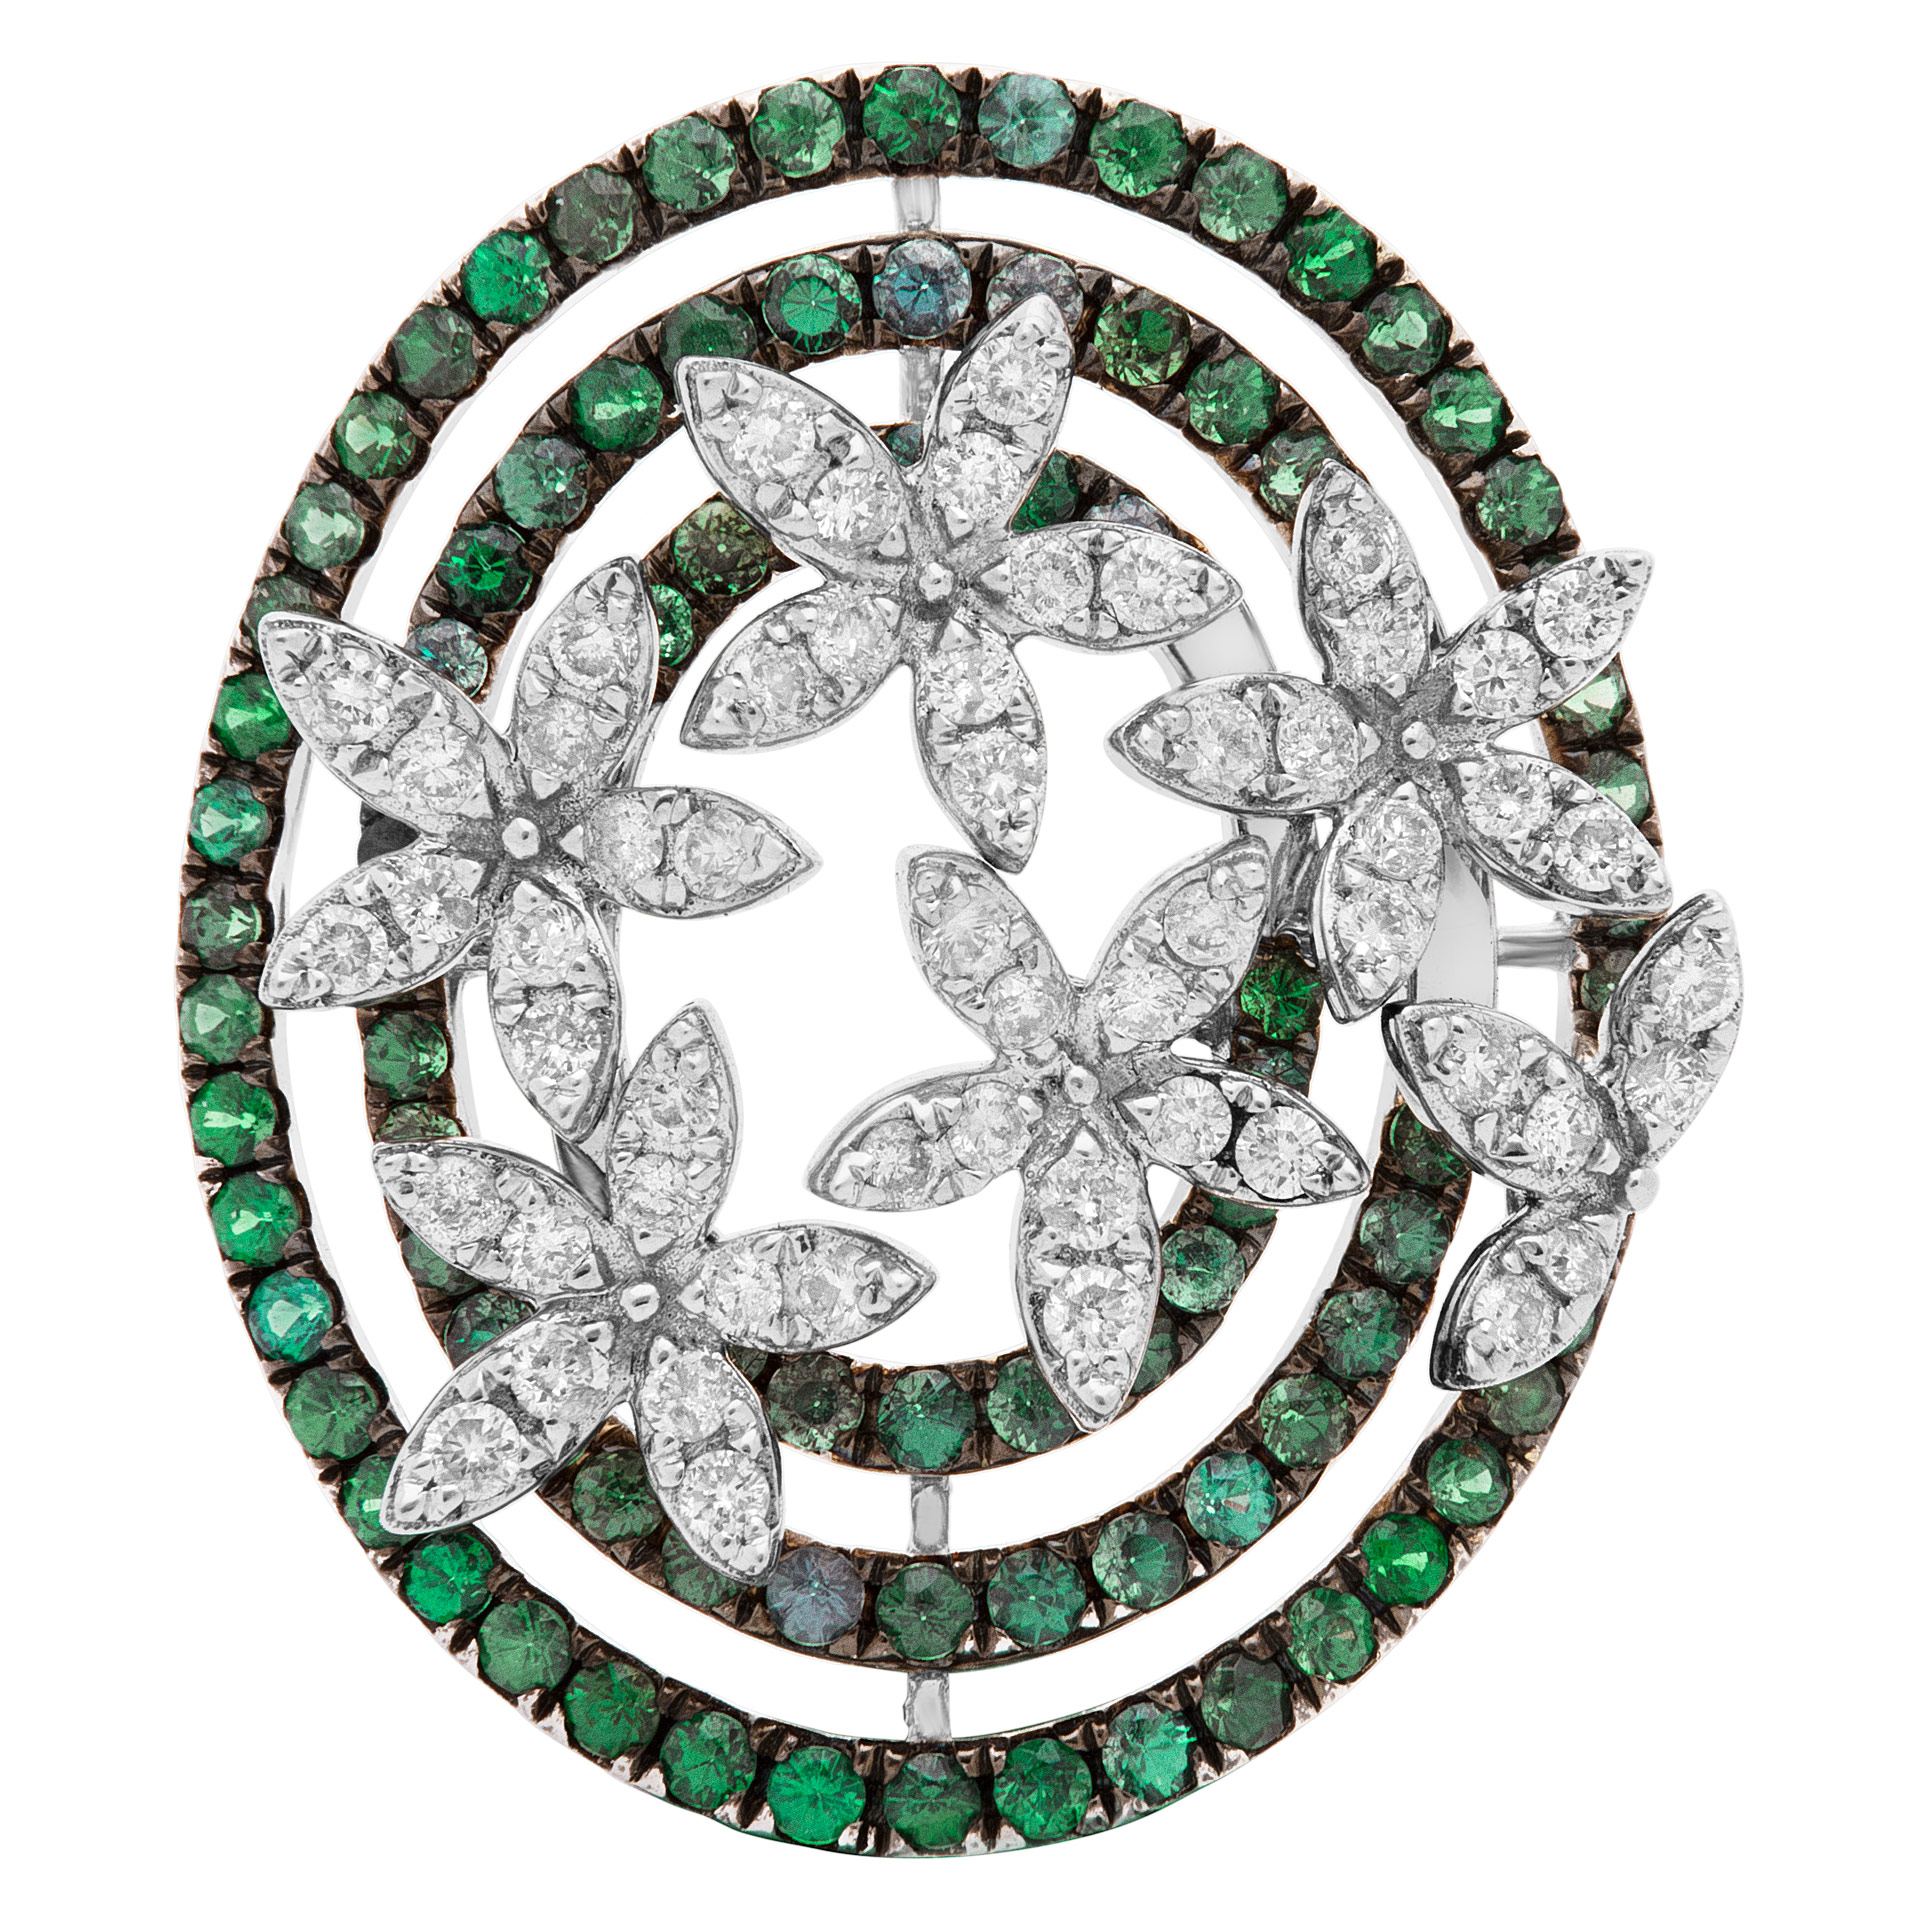 Floral style pendant in 18k white gold. 0.92 cts in diamonds and 2.13 cts in emerald